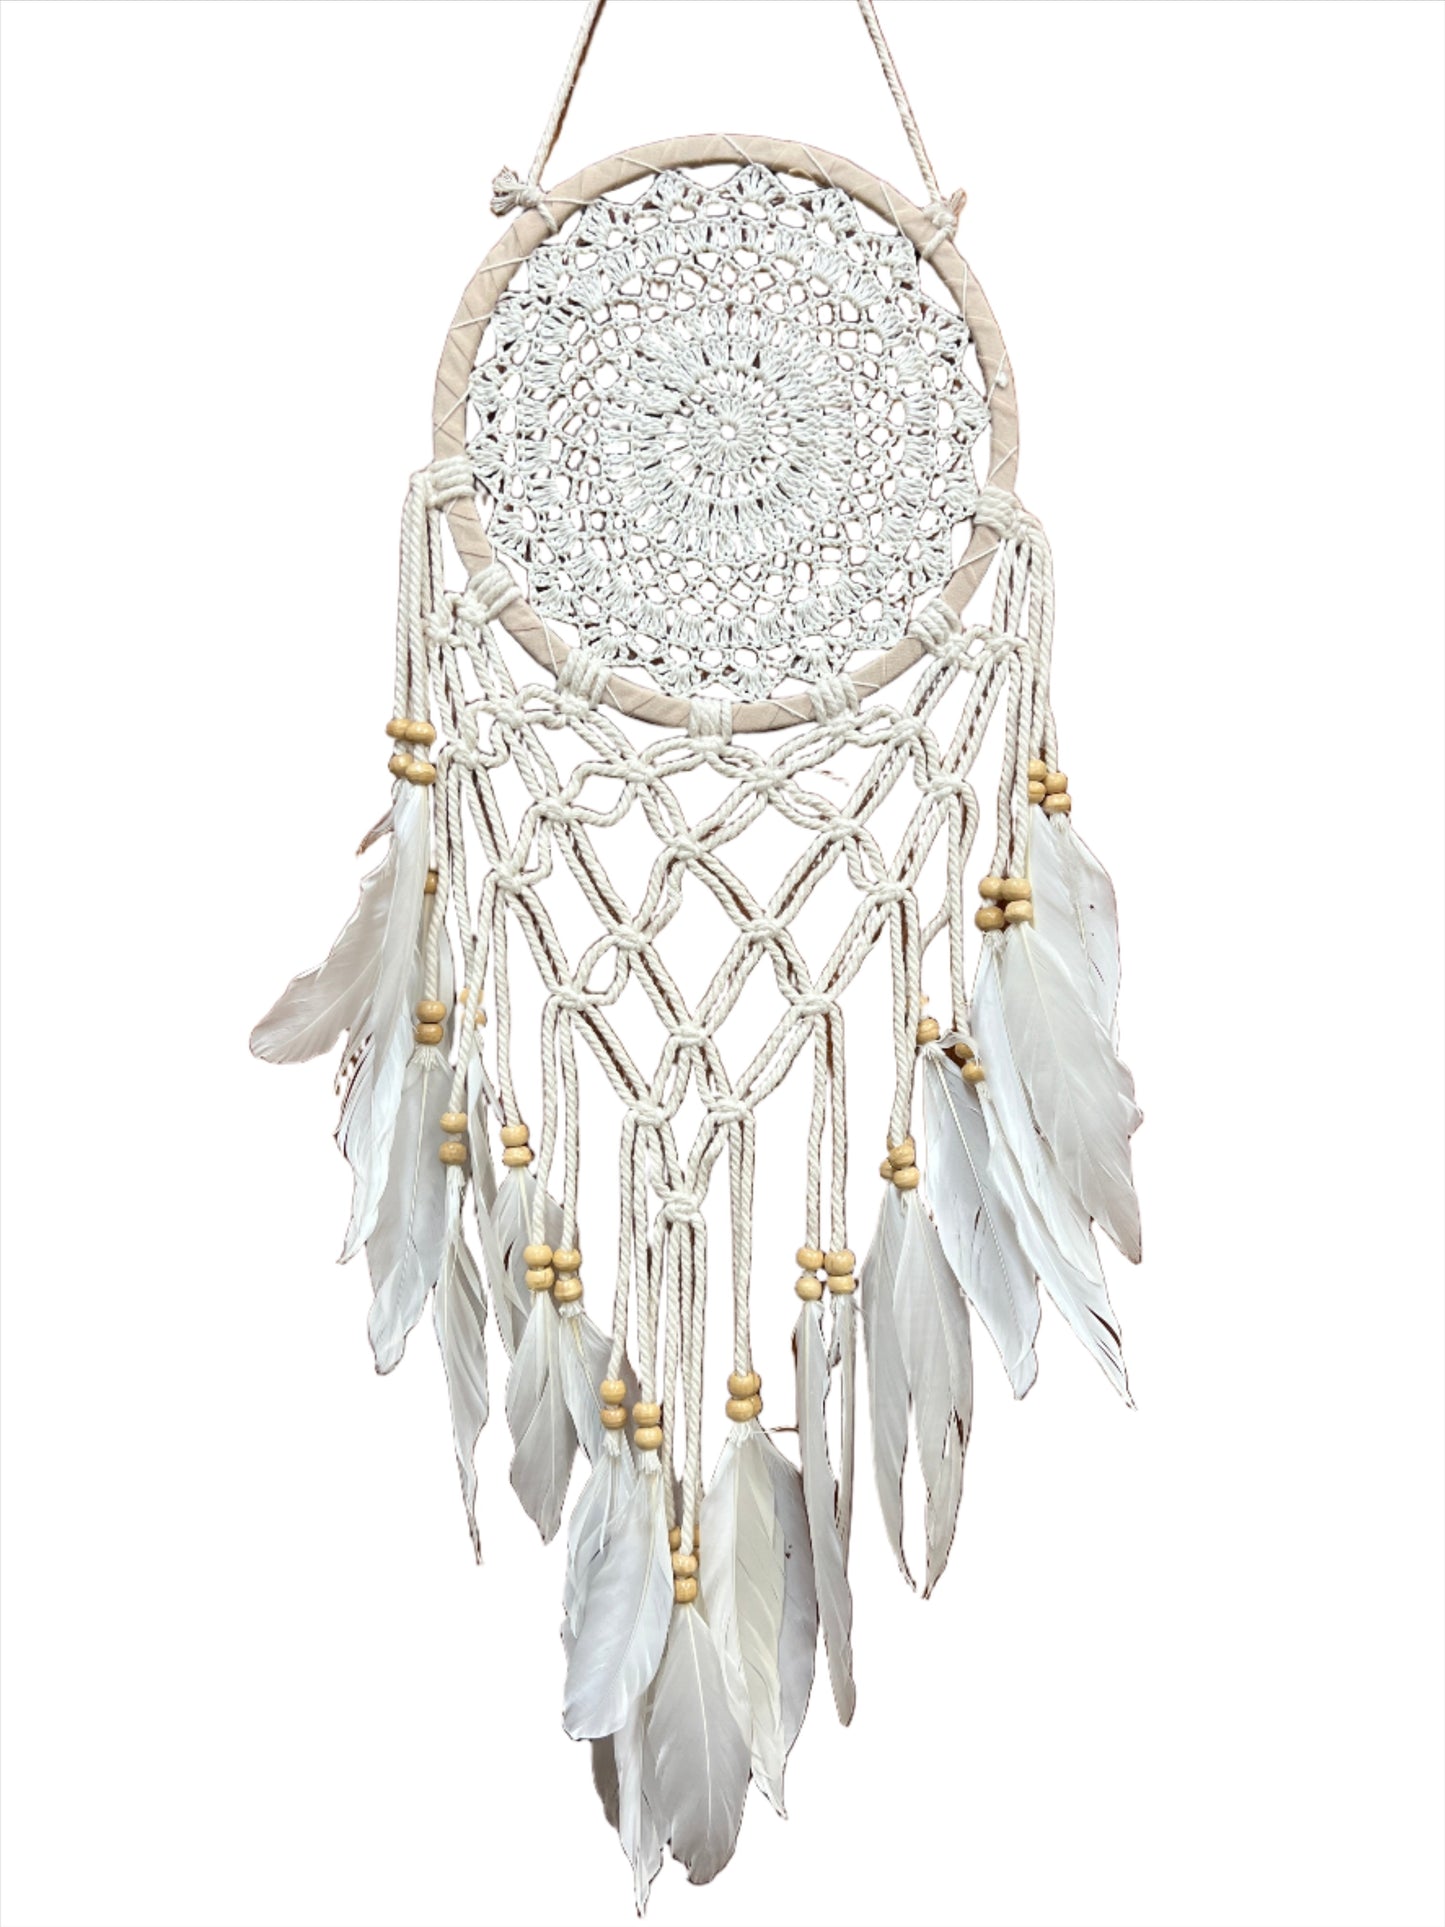 Crochet Dream Catcher with Swan Feathers